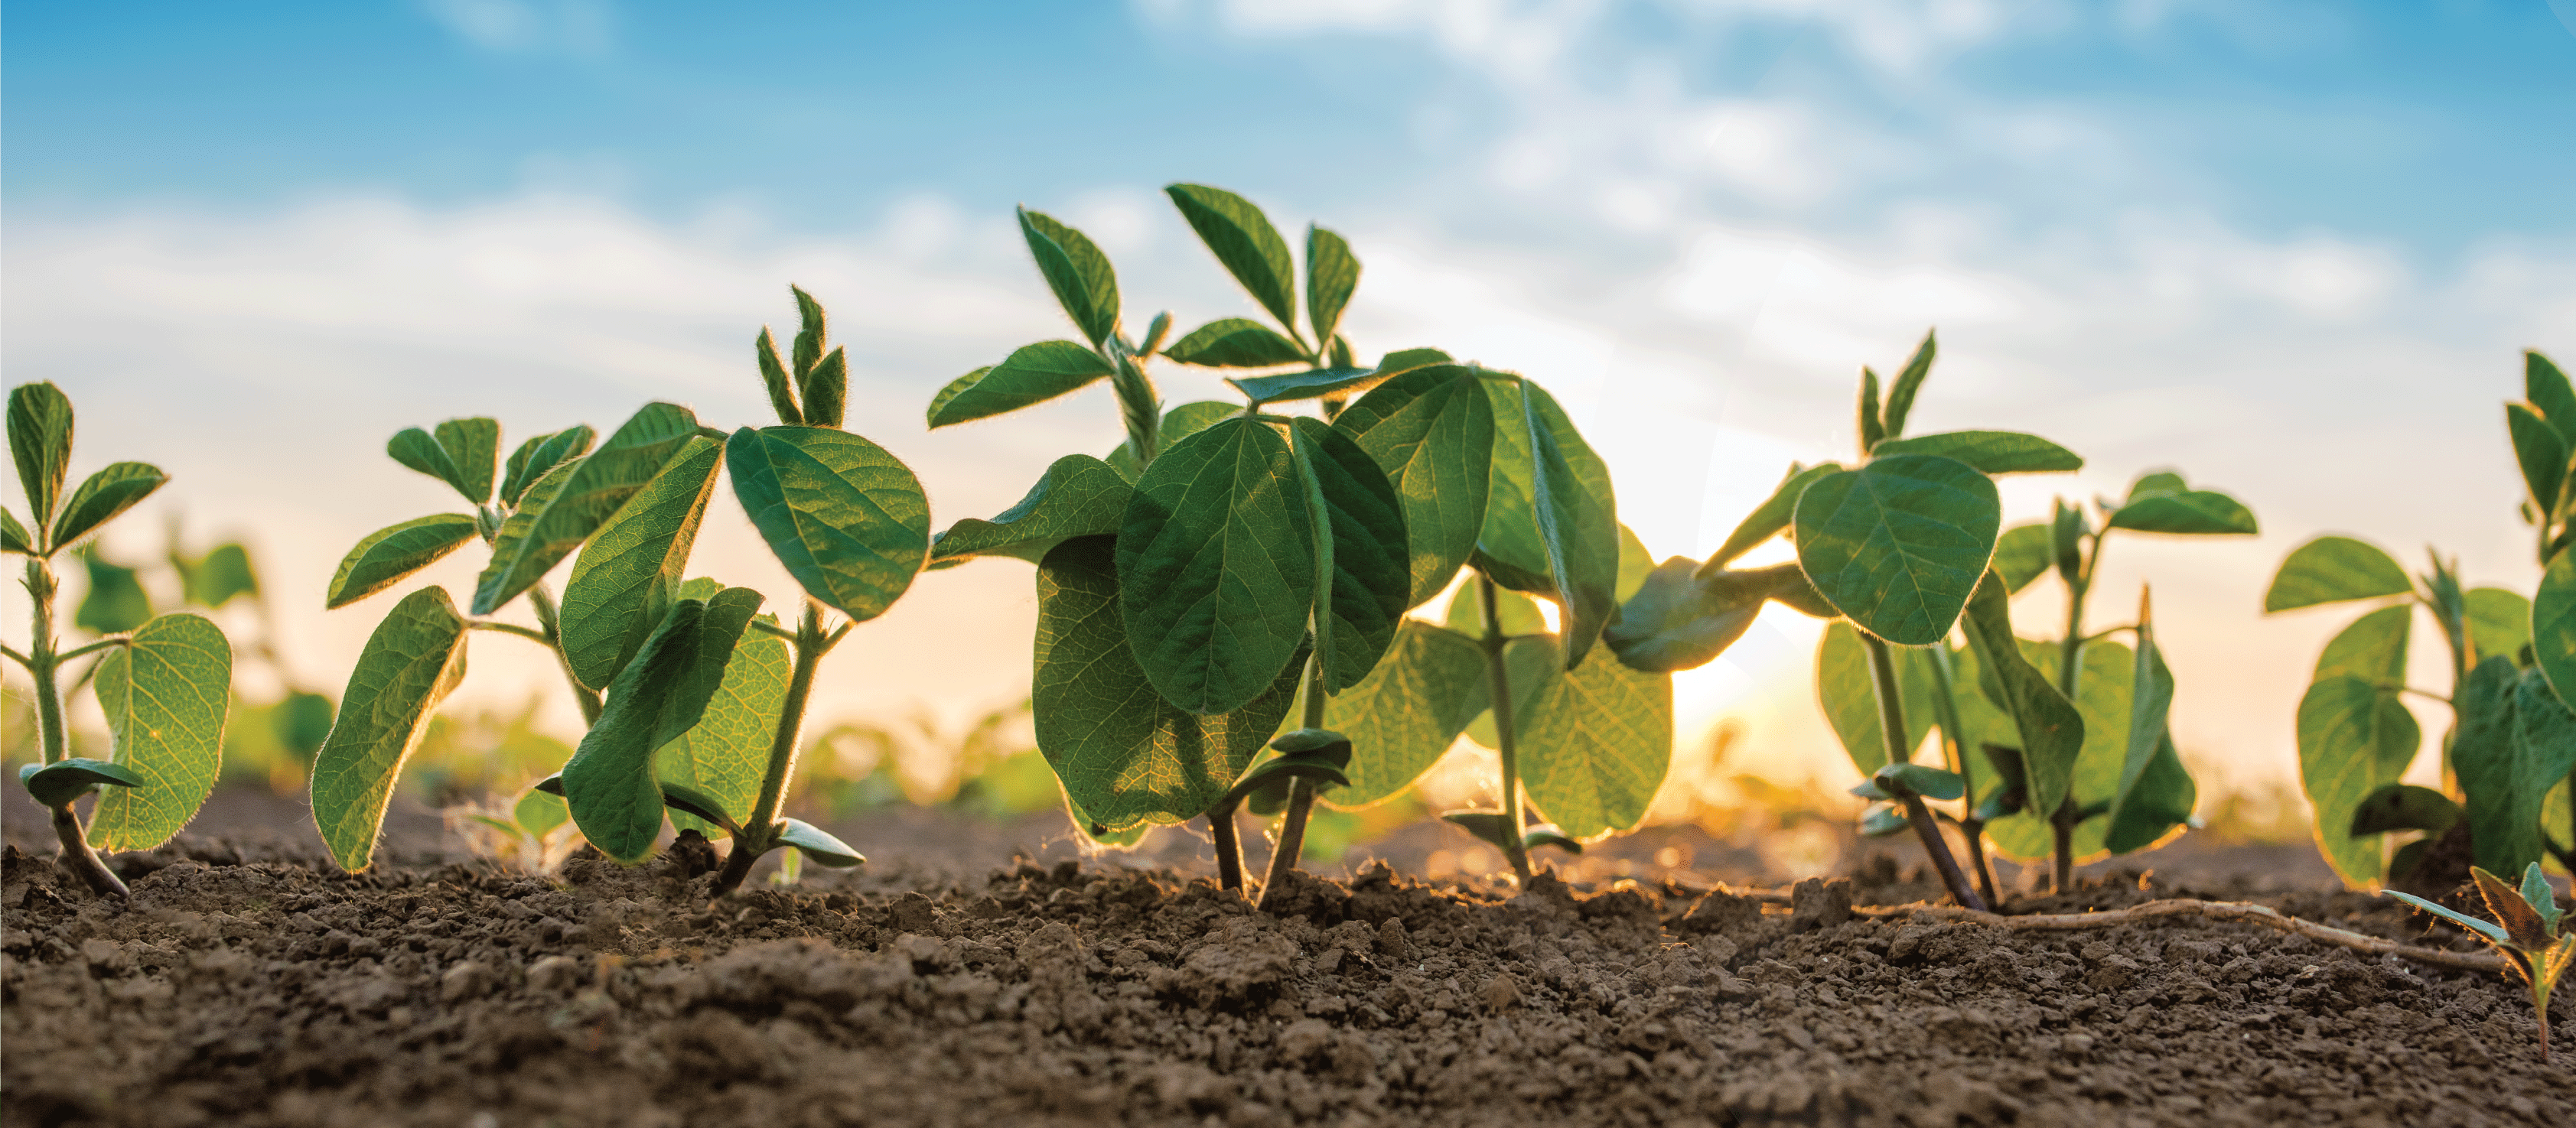 young soybean plants growing in soil blue sky sunset